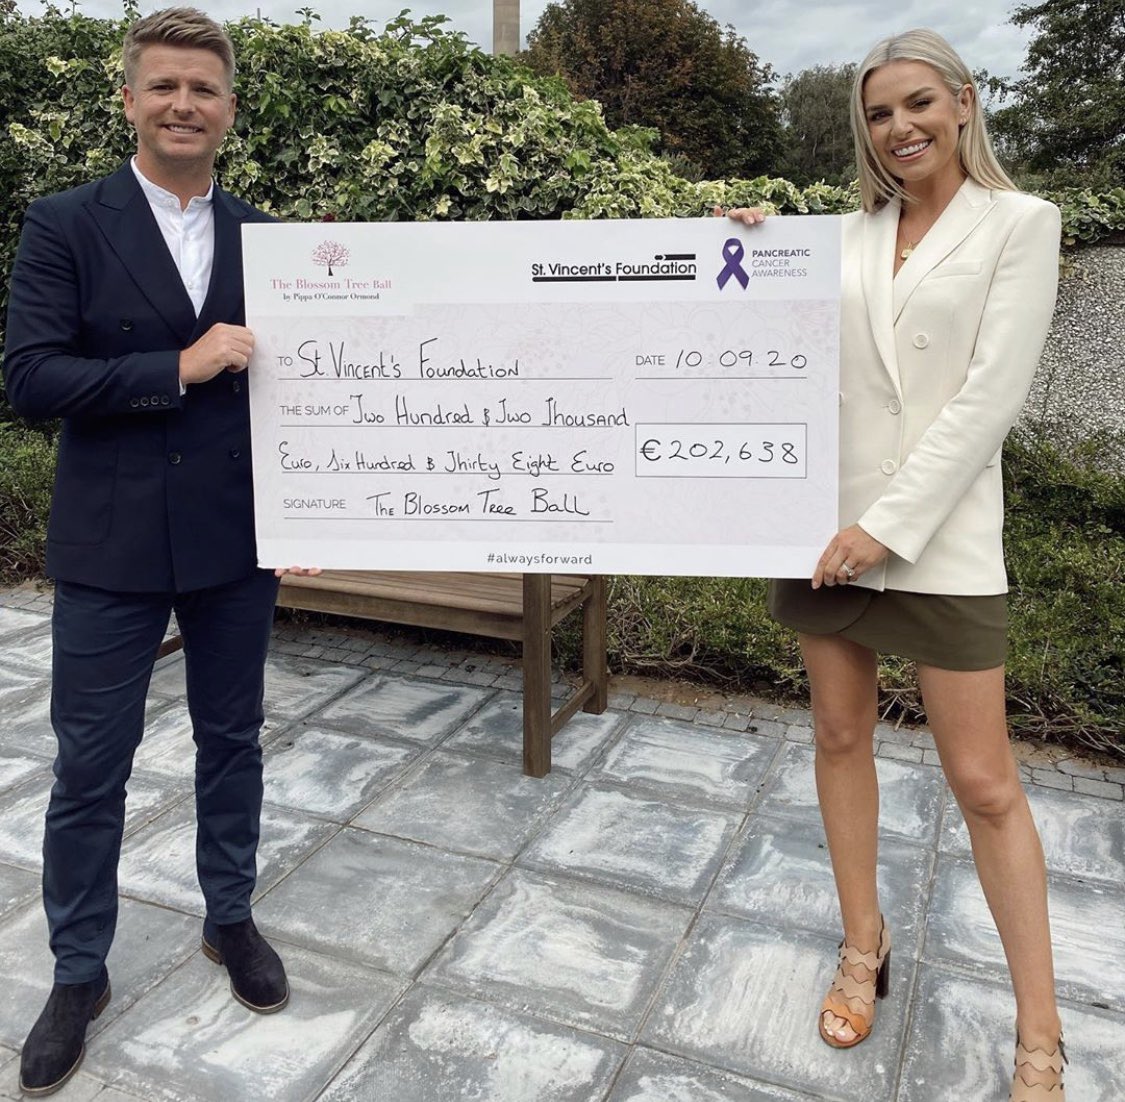 Very proud of @pipsypie and @brianormond79 for helping to raise such an incredible total for St. Vincent’s Foundation to help fund the Jenny McGovern Pancreatic Cancer Clinical Database 👏🏼